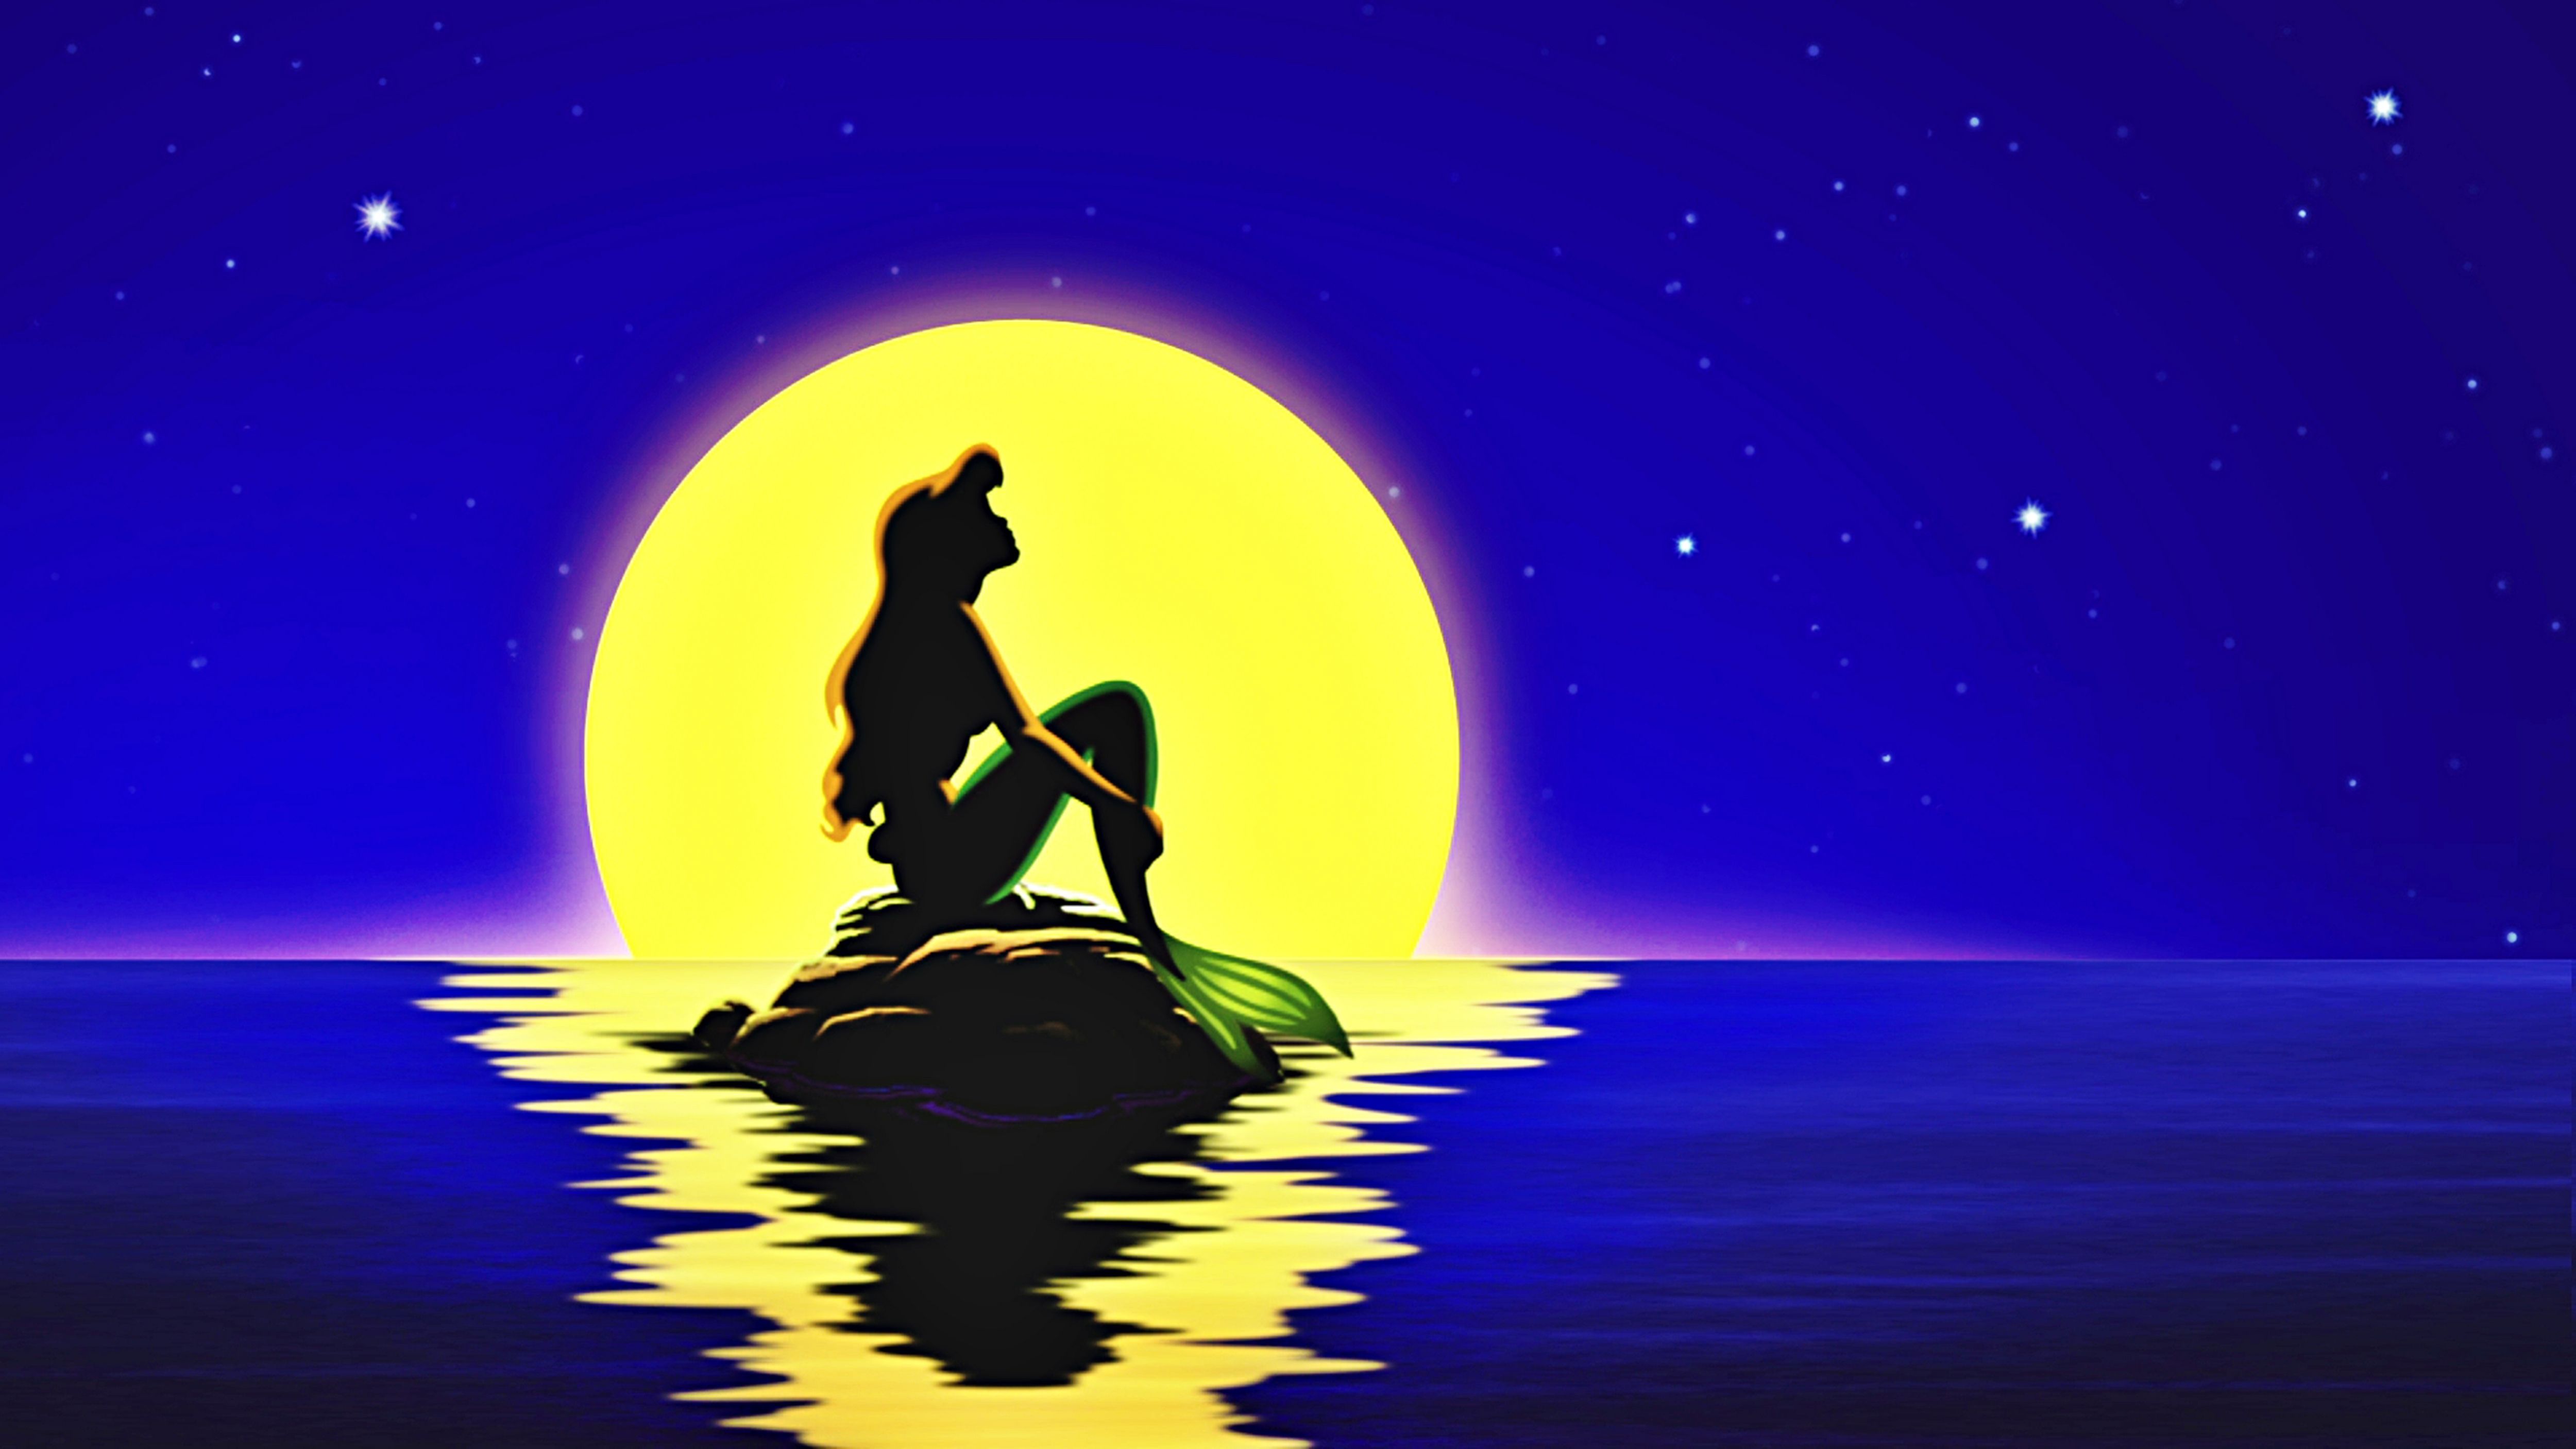 Disney Wallpapers HD | Full HD Pictures